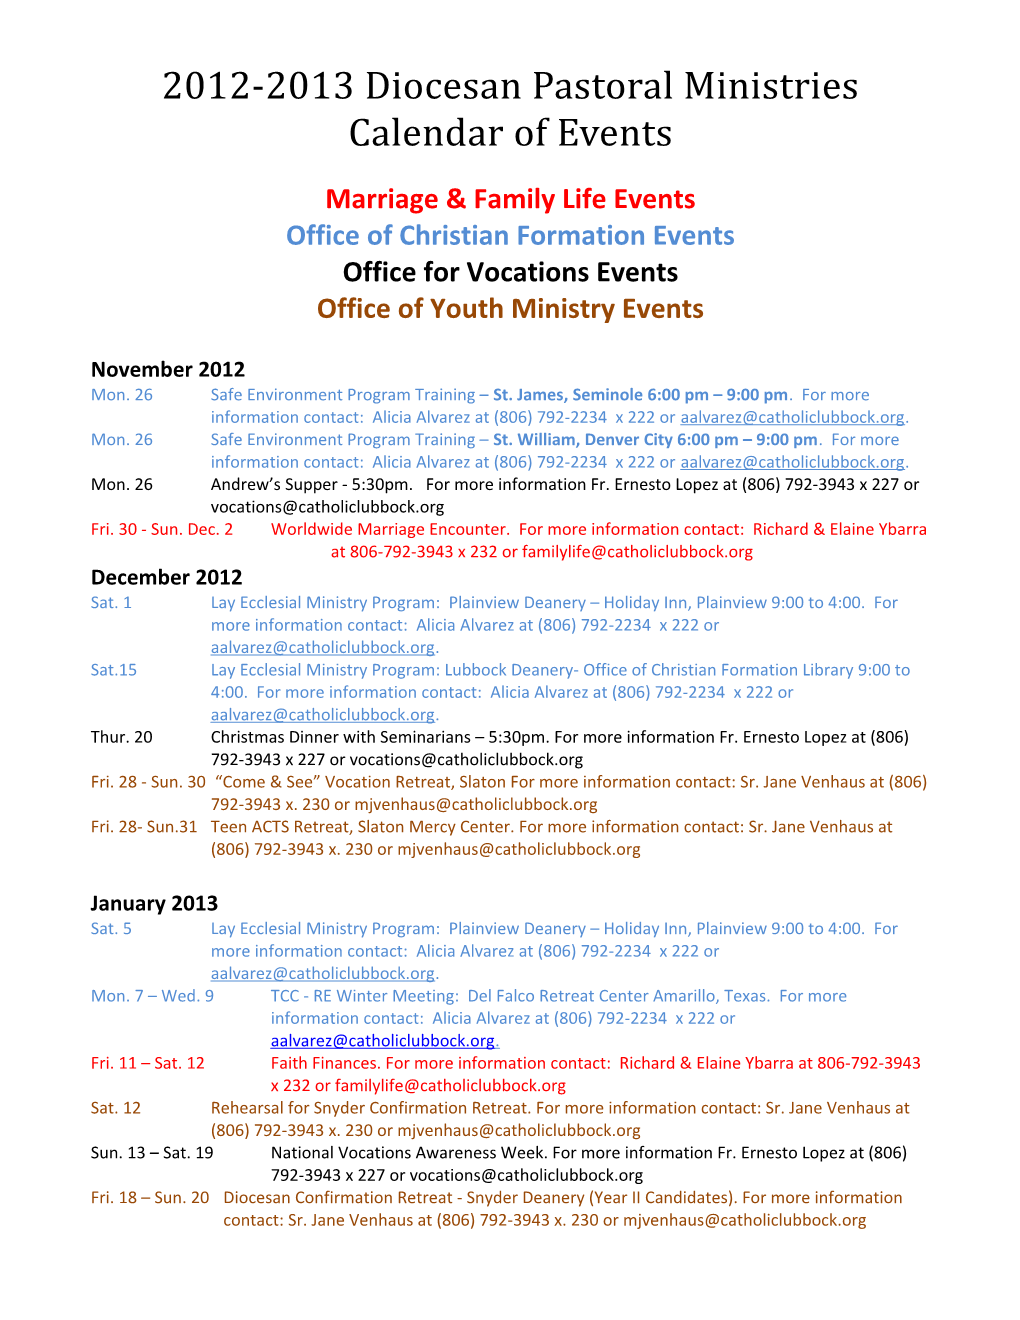 2012-2013 Diocesan Pastoral Ministries Calendar of Events